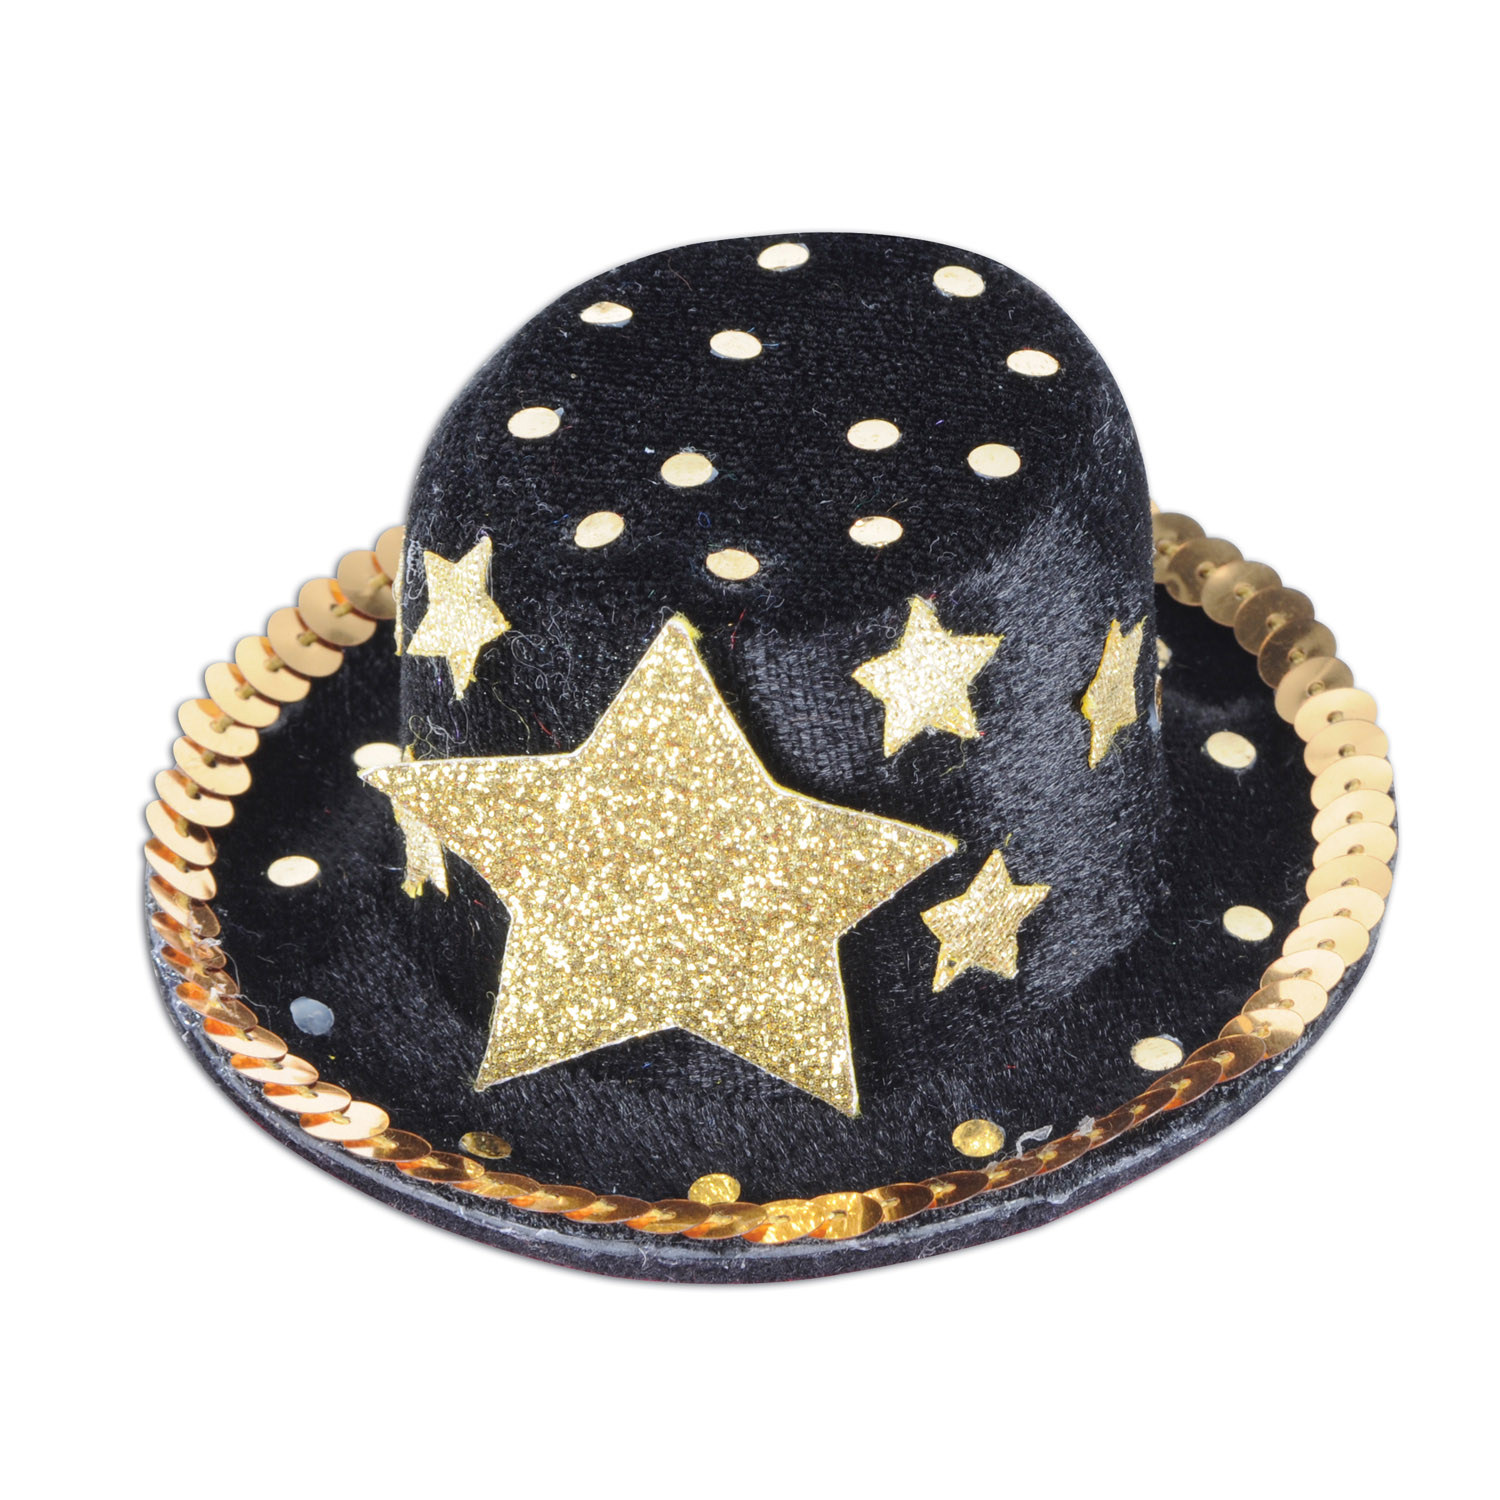 Top hat hair clip with a black base, gold stars, dots and sequines.